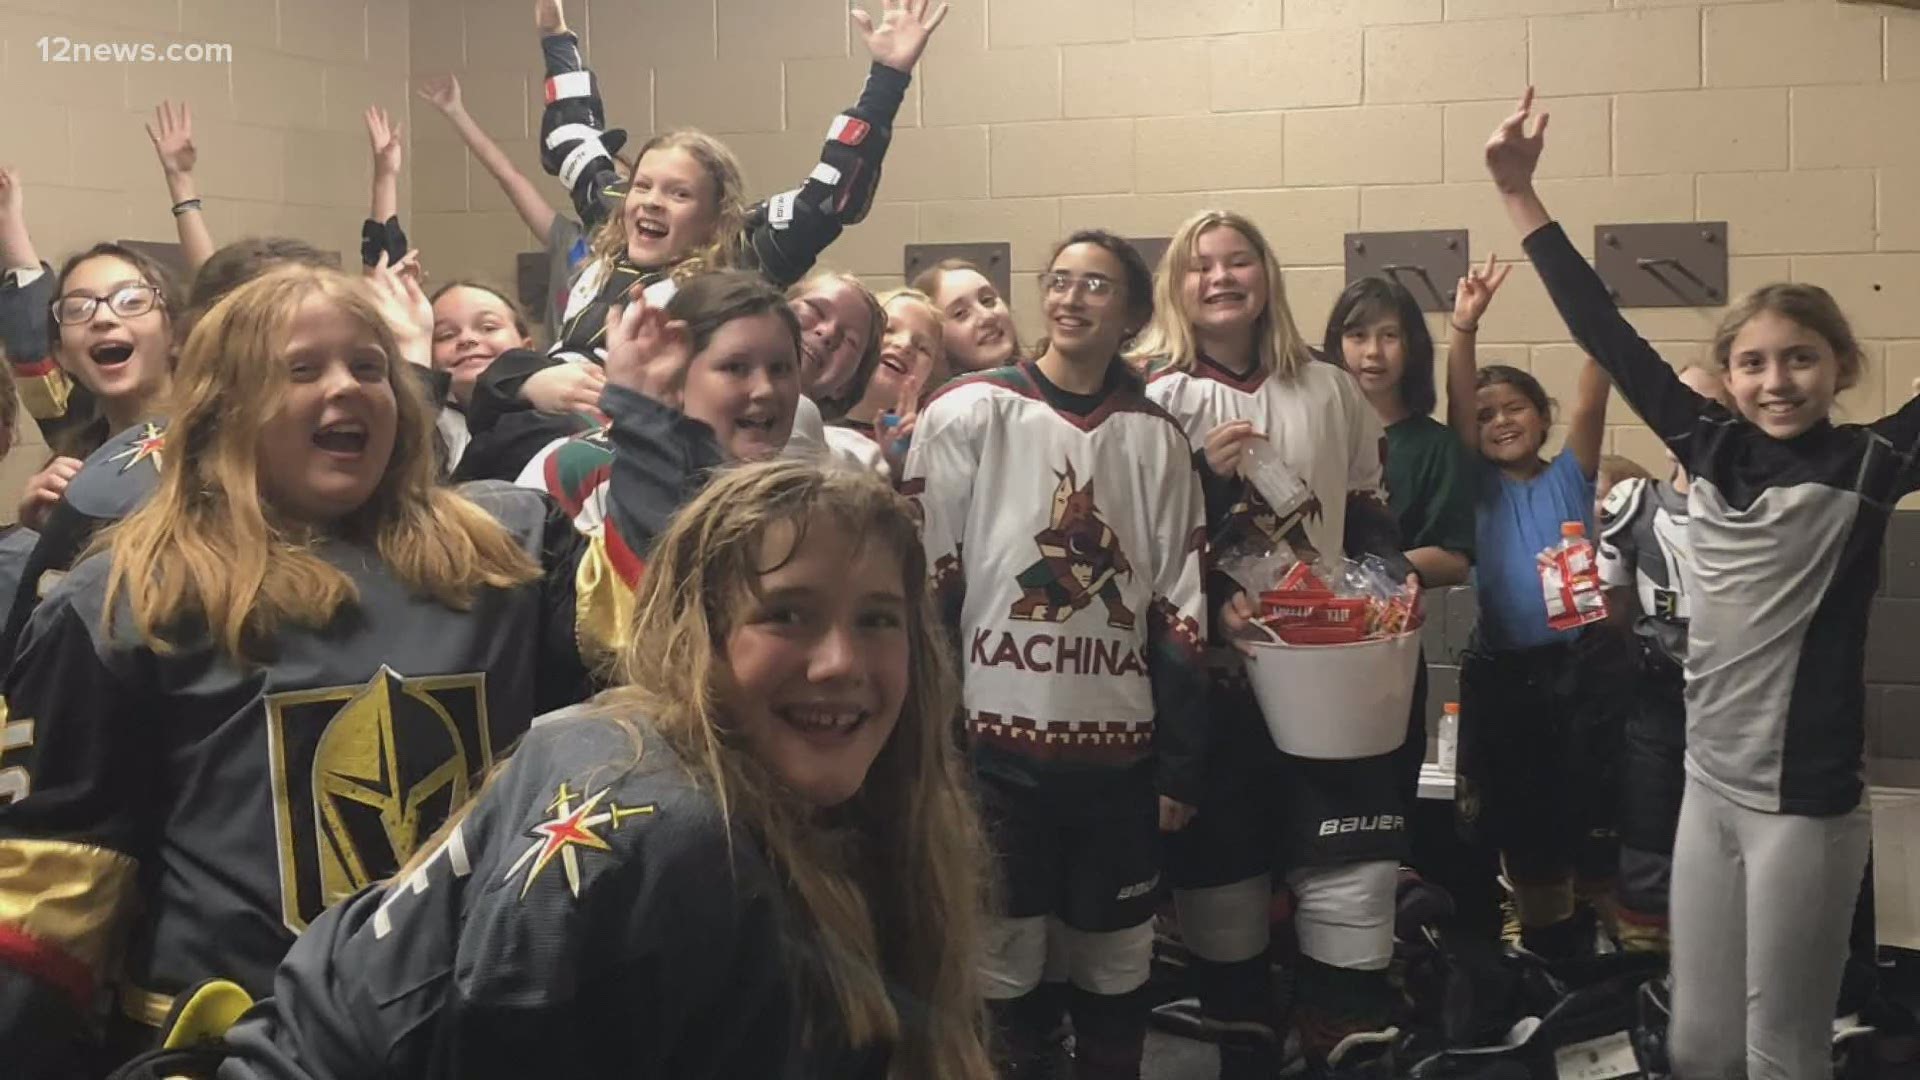 Finding ice to play hockey on in the desert is hard to come by, but that's about to change for the booming Arizona Kachinas women's hockey program.